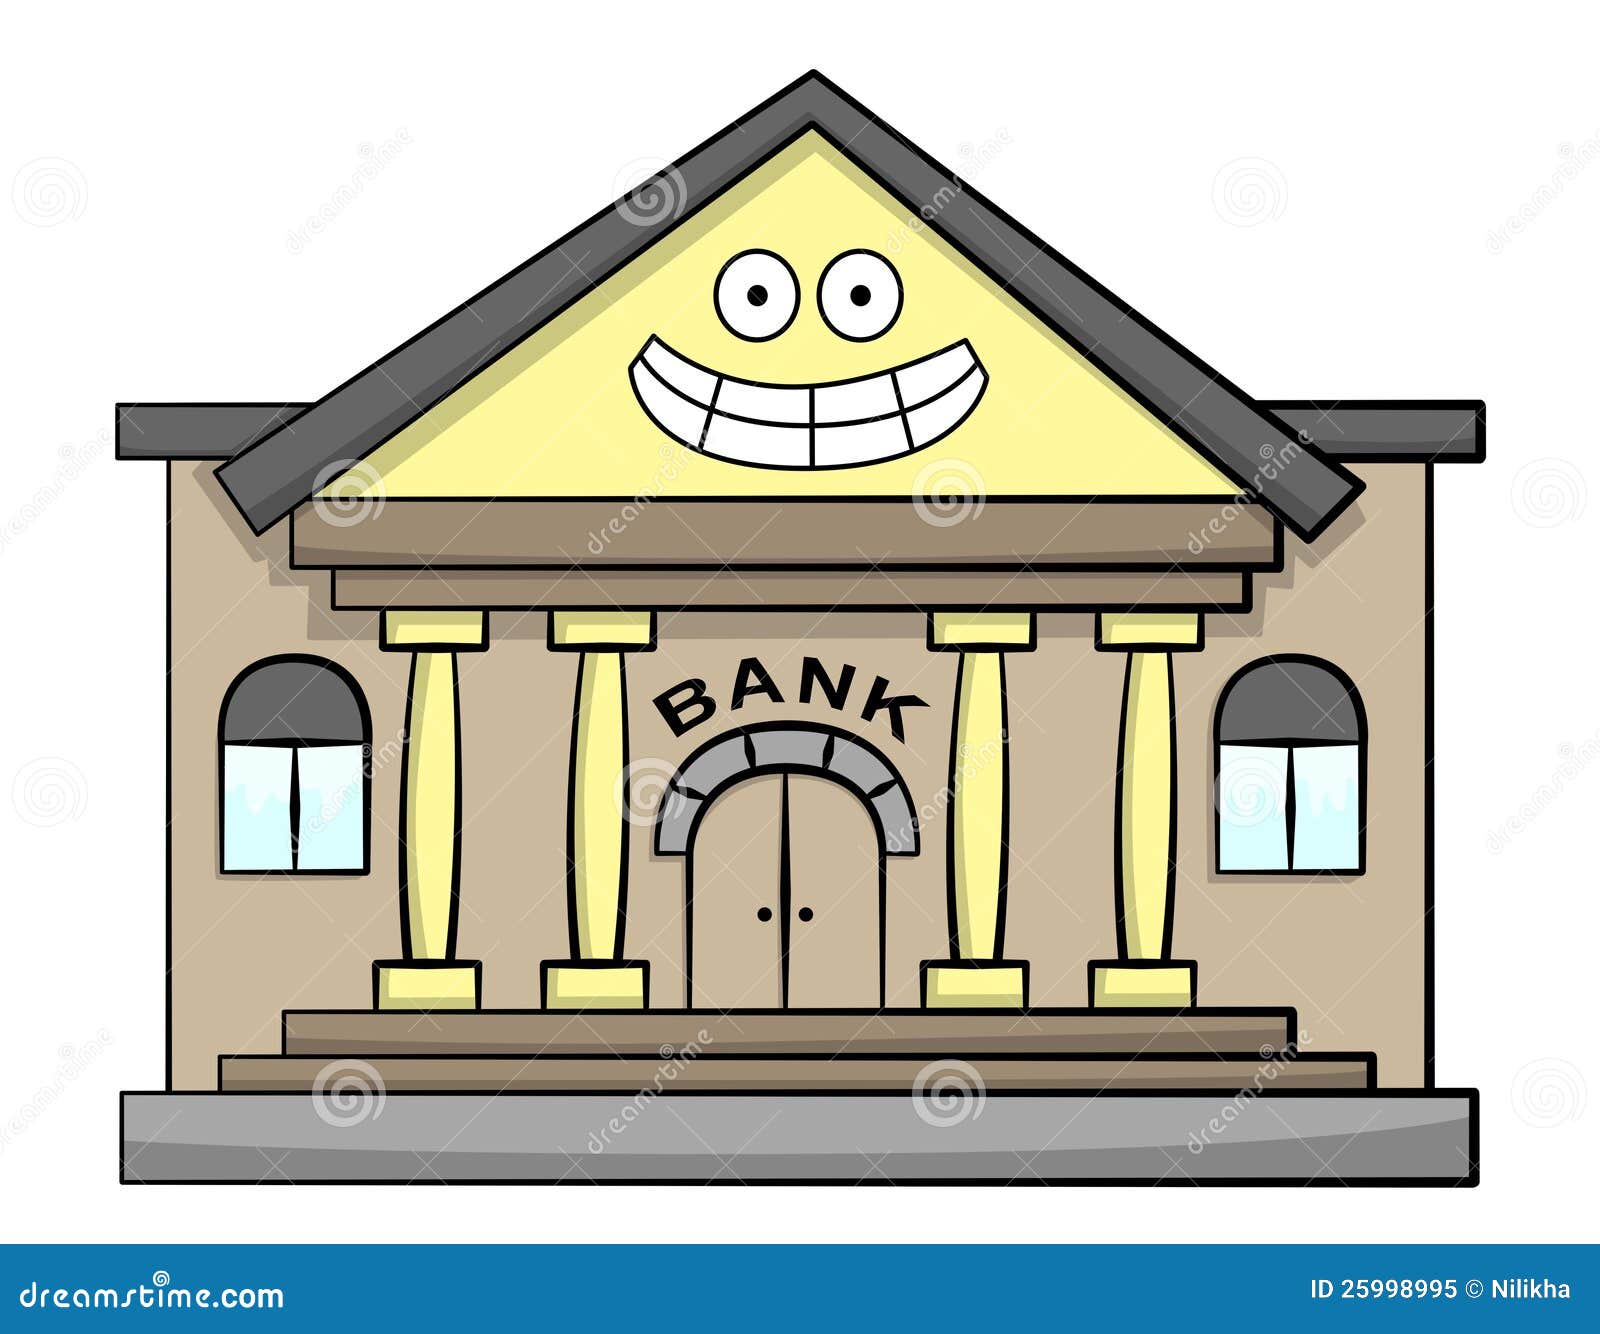 clipart of a bank - photo #16